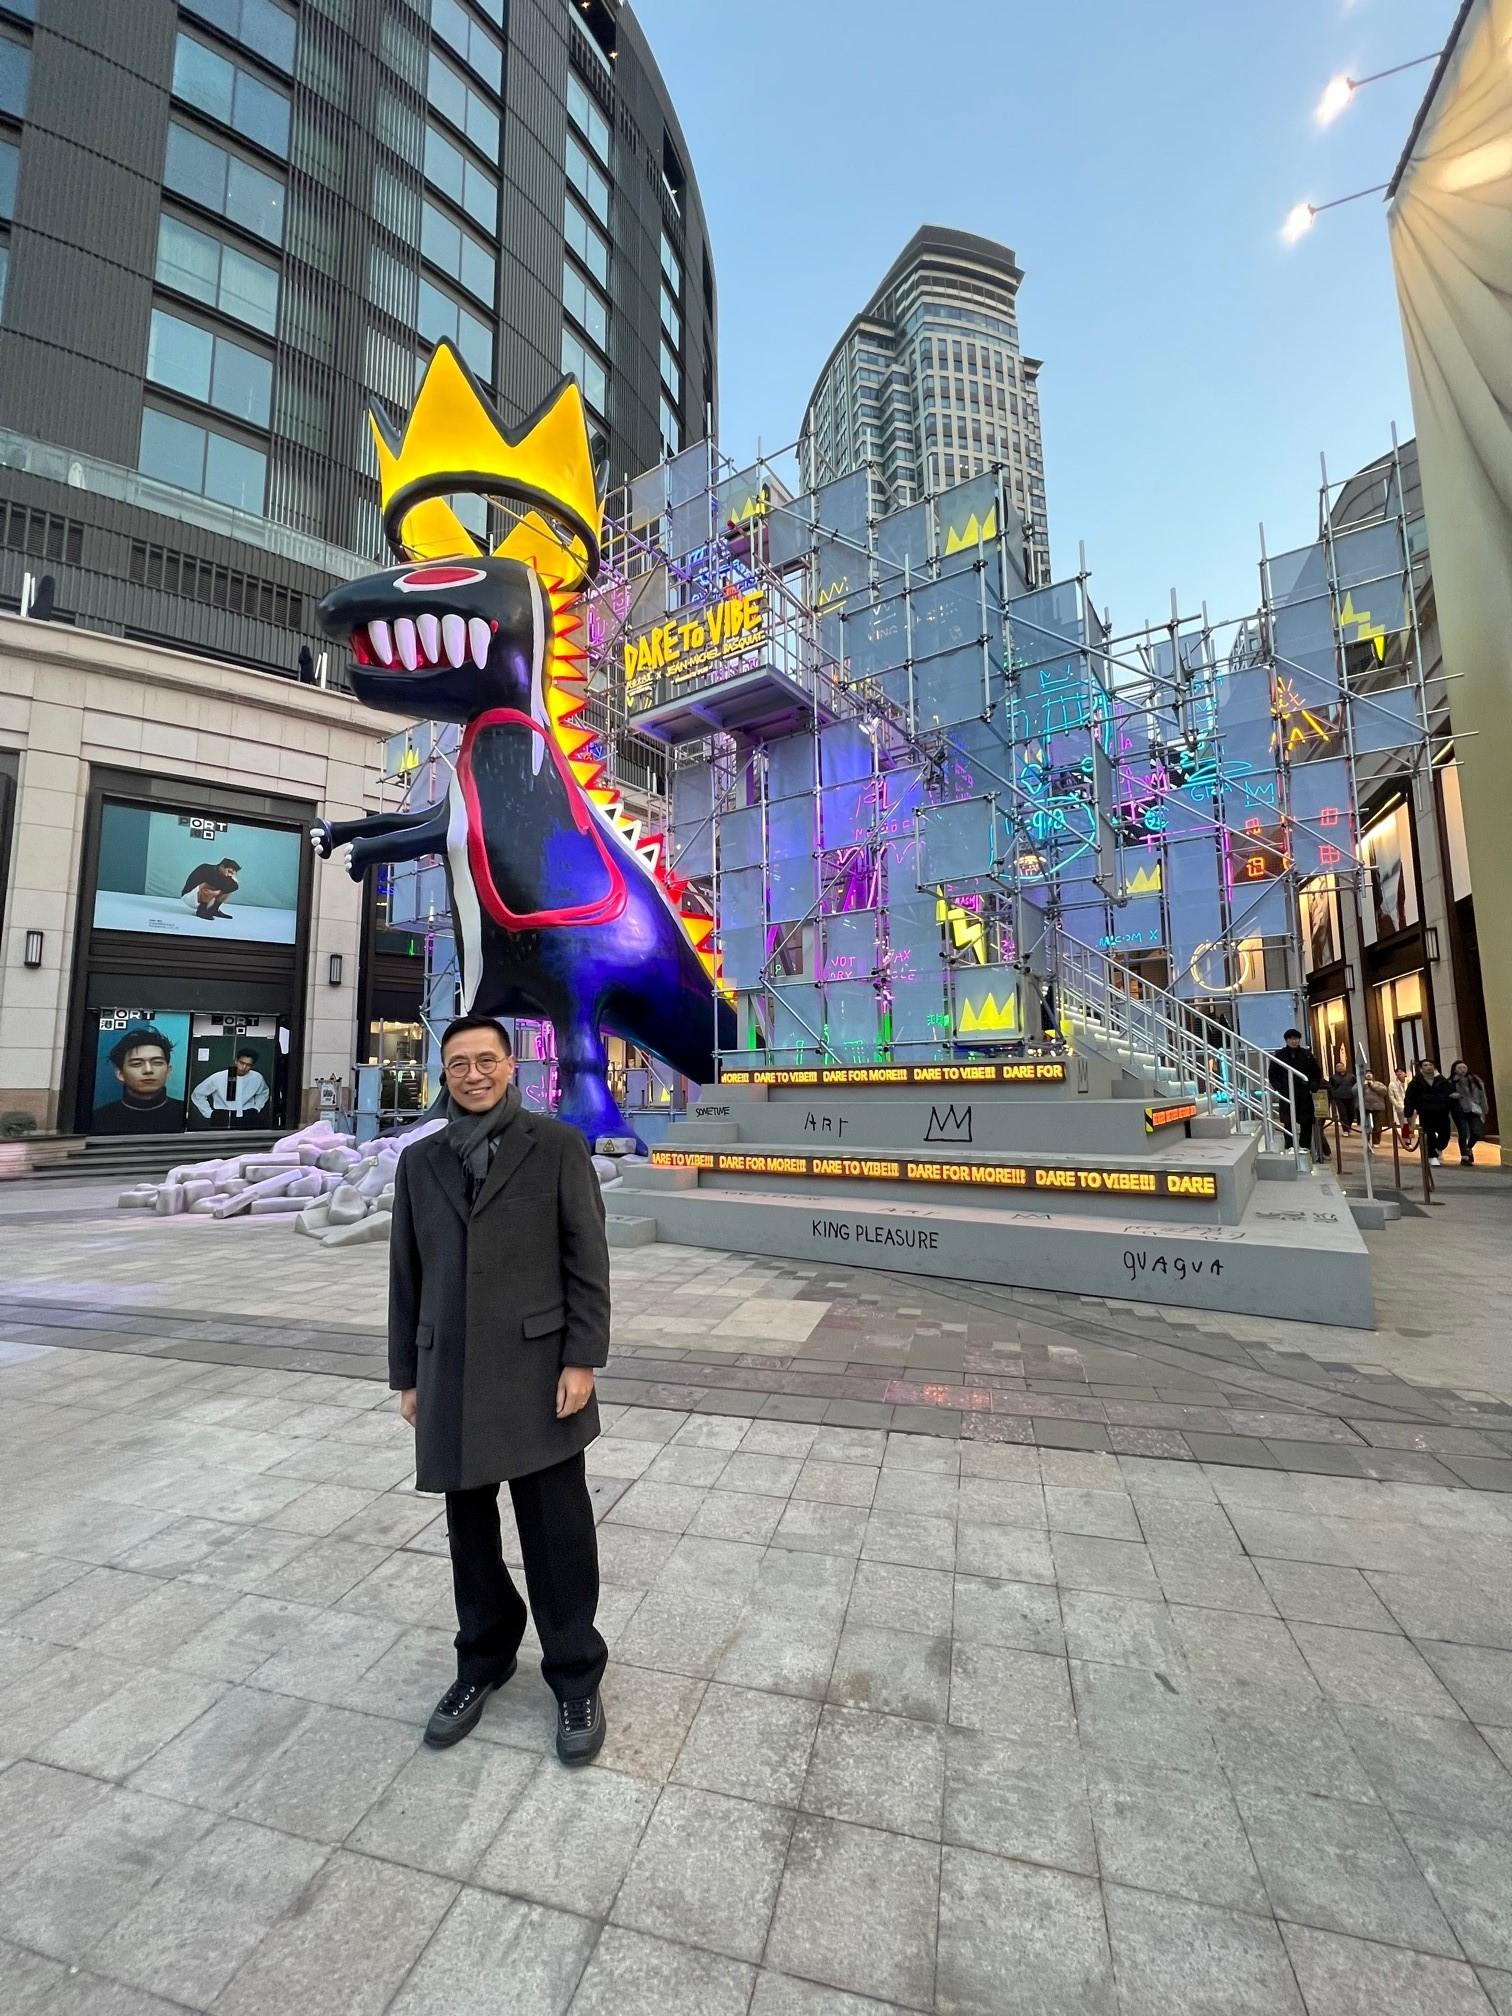 The Secretary for Culture, Sports and Tourism, Mr Kevin Yeung, viewed public art installations in Shanghai yesterday (January 7).